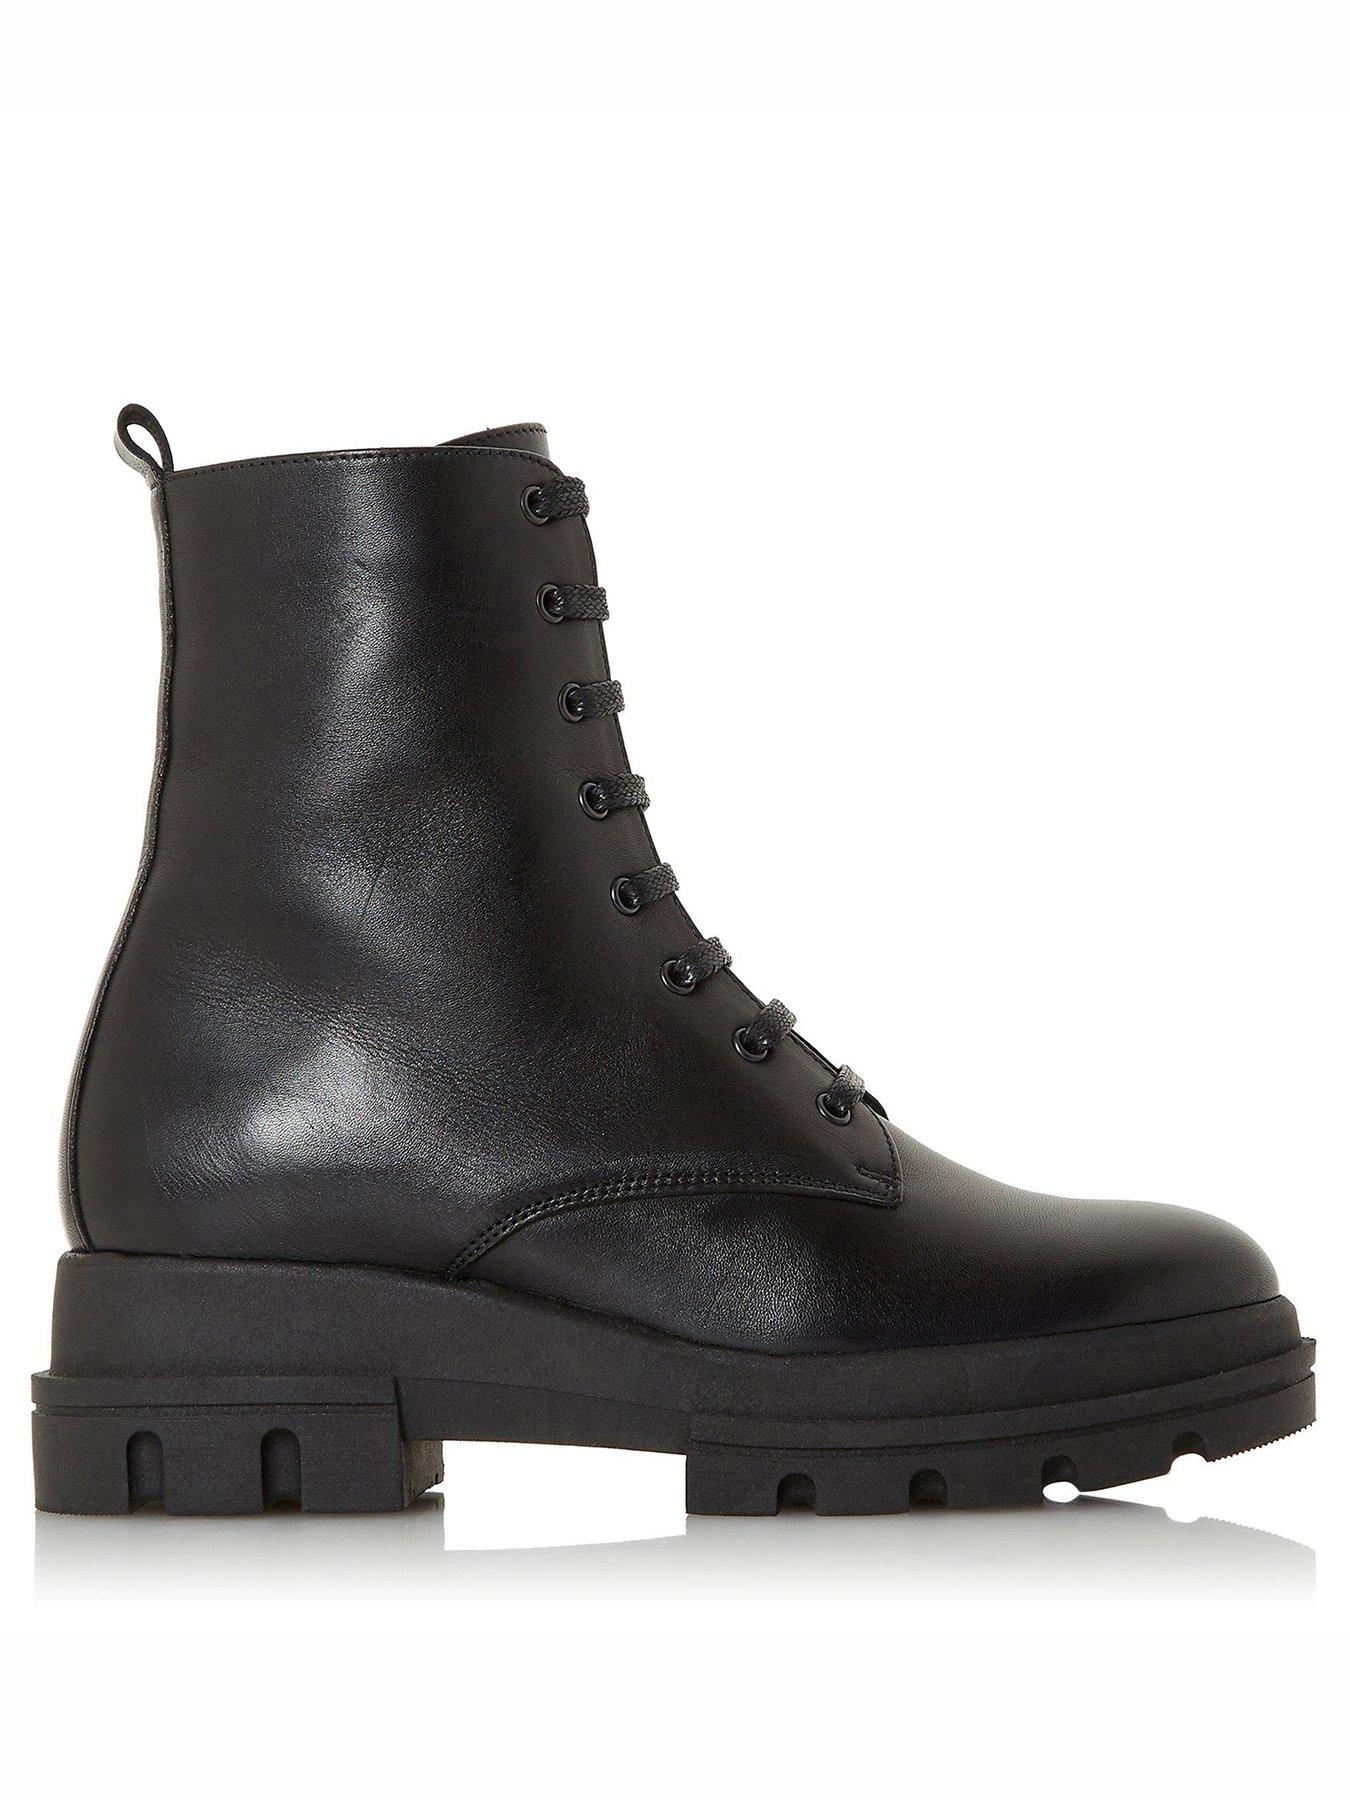  Parque T Lace Up Leather Ankle Boot - Black